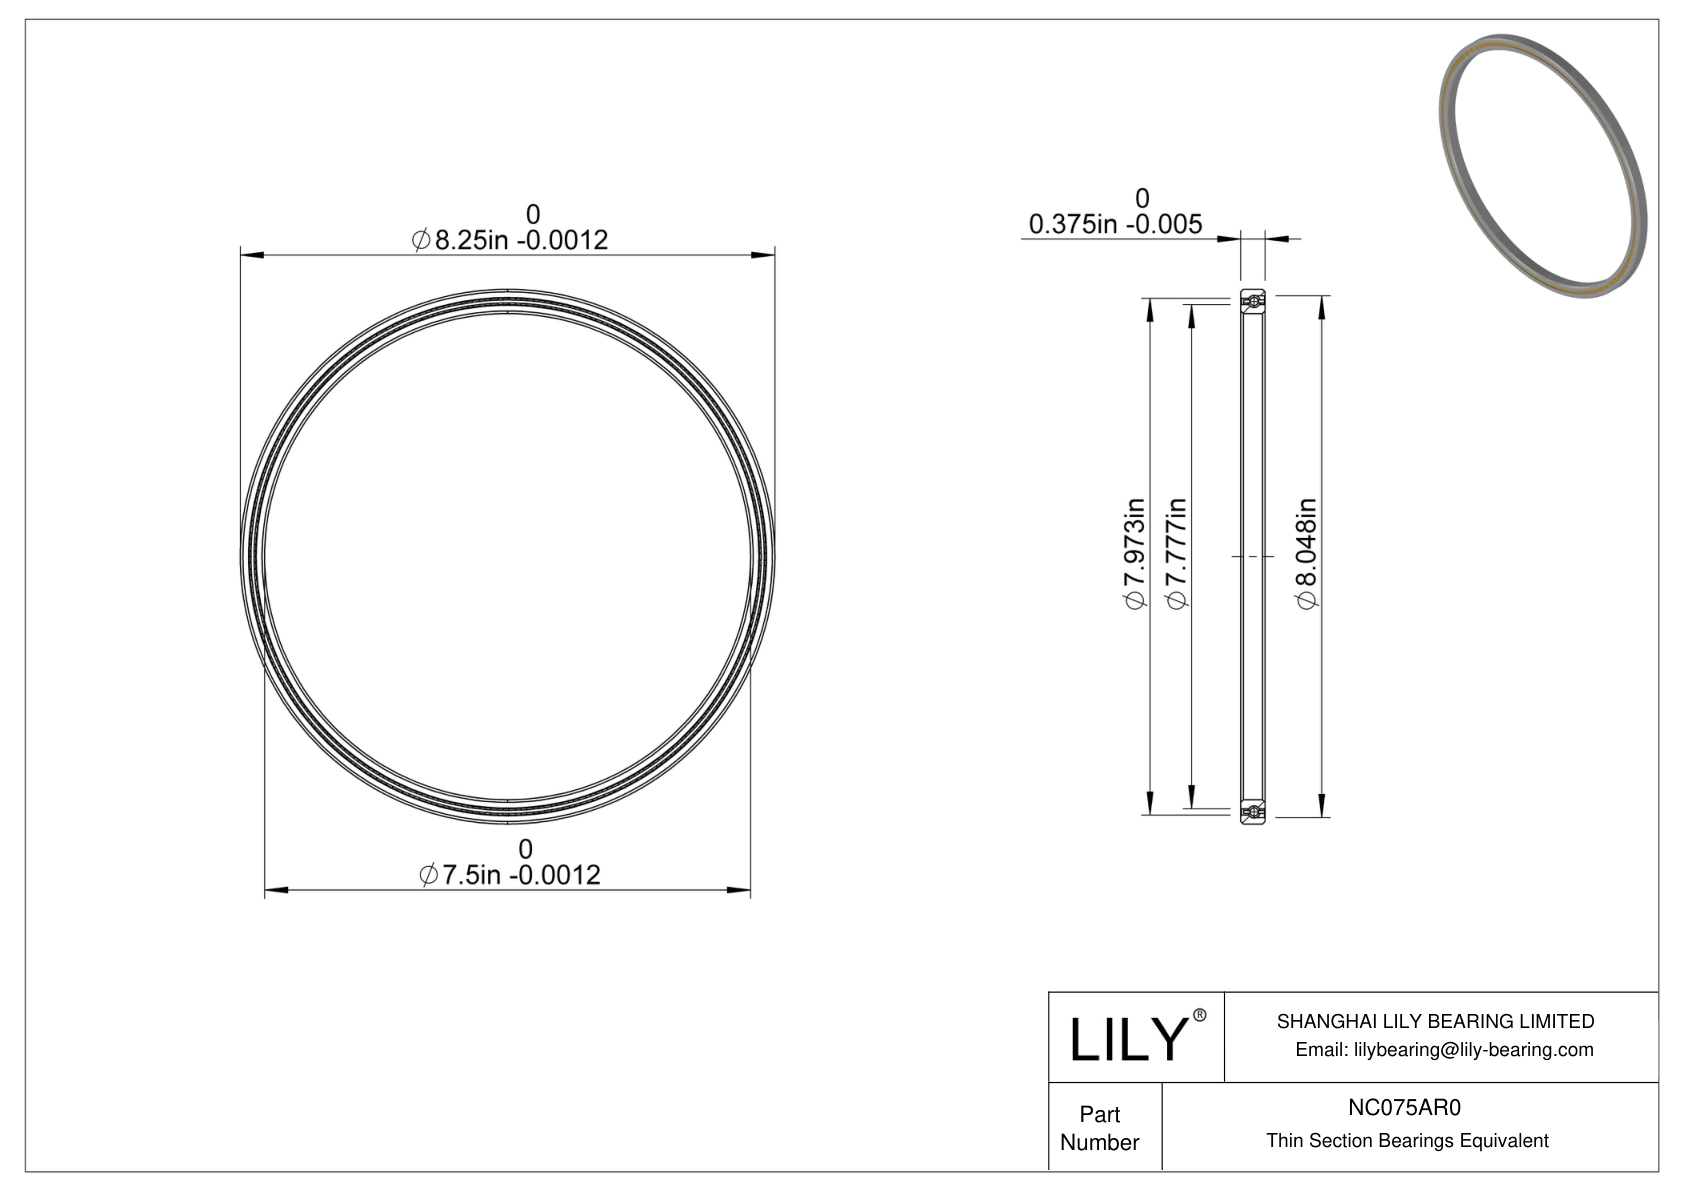 NC075AR0 Constant Section (CS) Bearings cad drawing